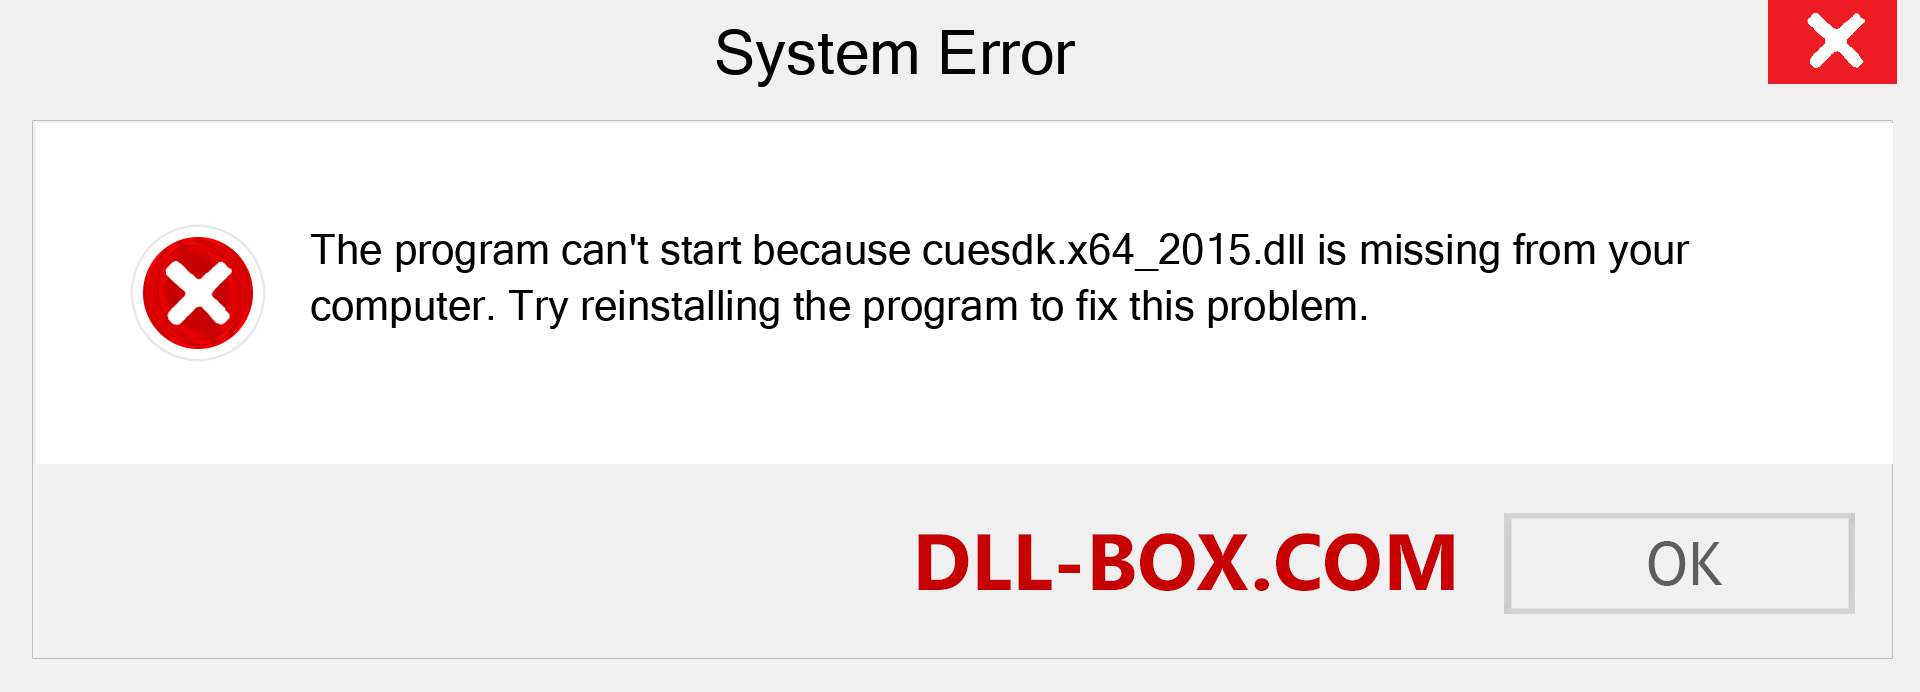  cuesdk.x64_2015.dll file is missing?. Download for Windows 7, 8, 10 - Fix  cuesdk.x64_2015 dll Missing Error on Windows, photos, images